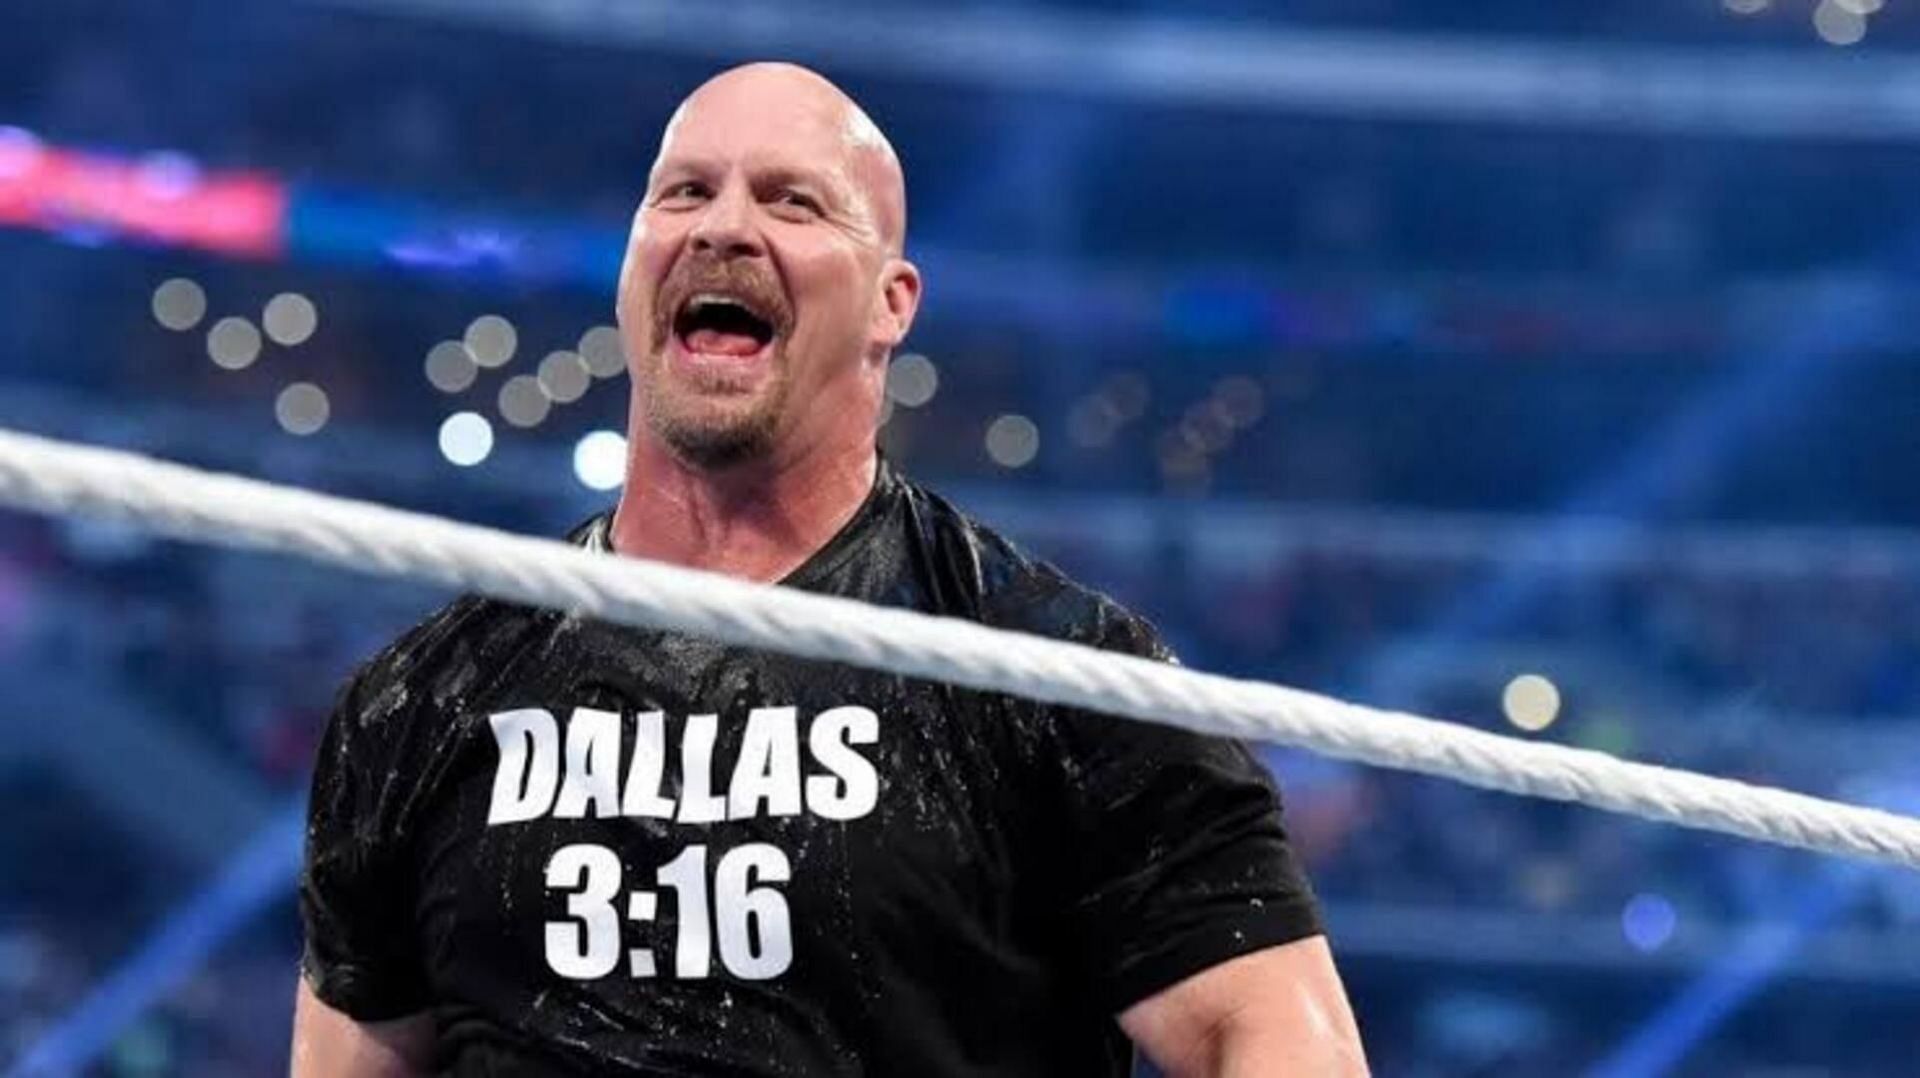 Stone Cold Steve Austin defeated Kevin Owens at WWE WrestleMania 38.